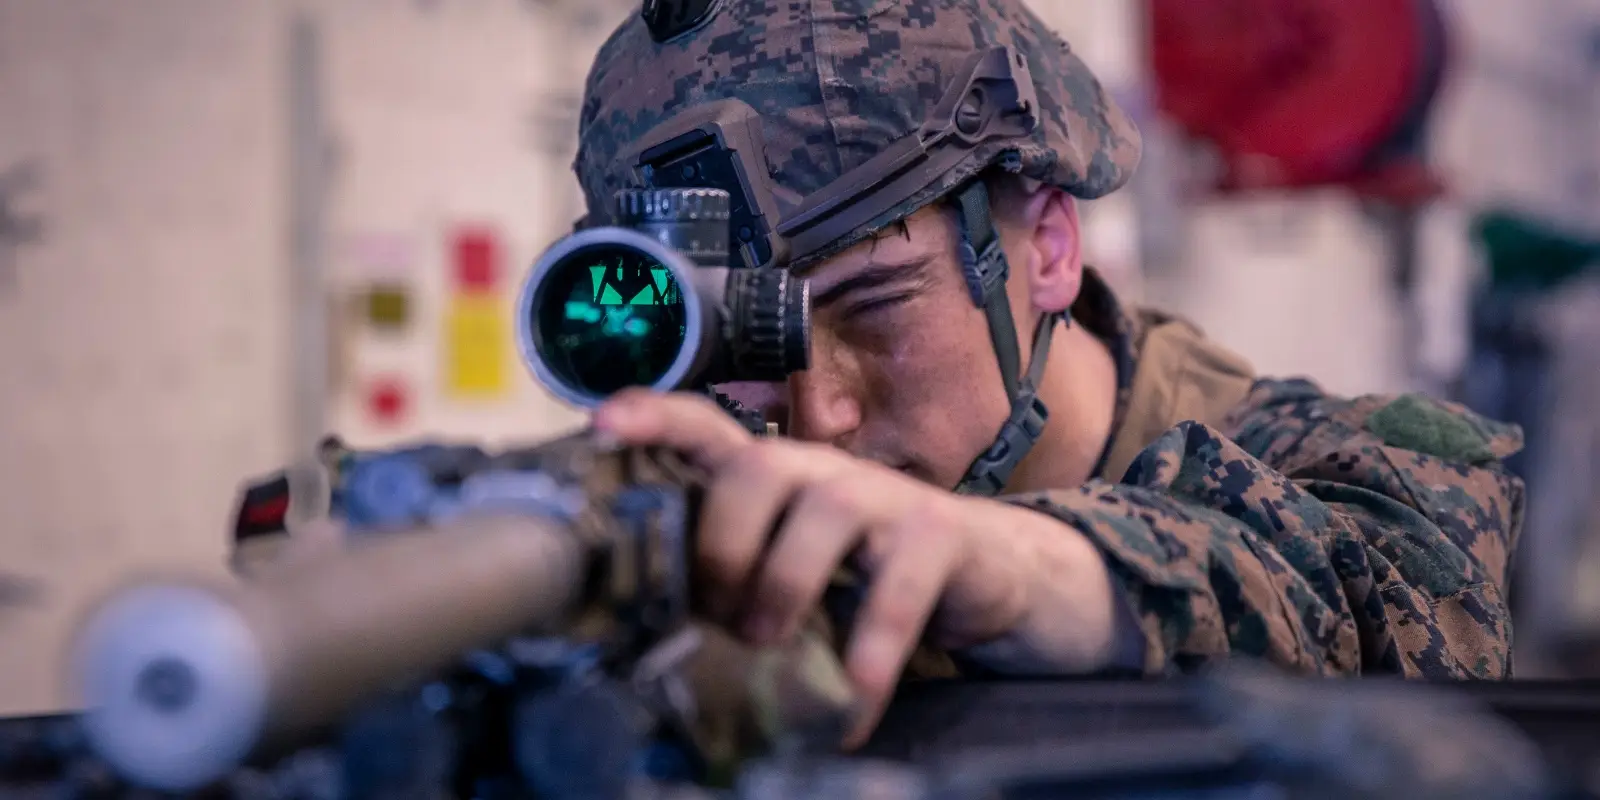 USMC snipers test new Mk22 precision rifle system